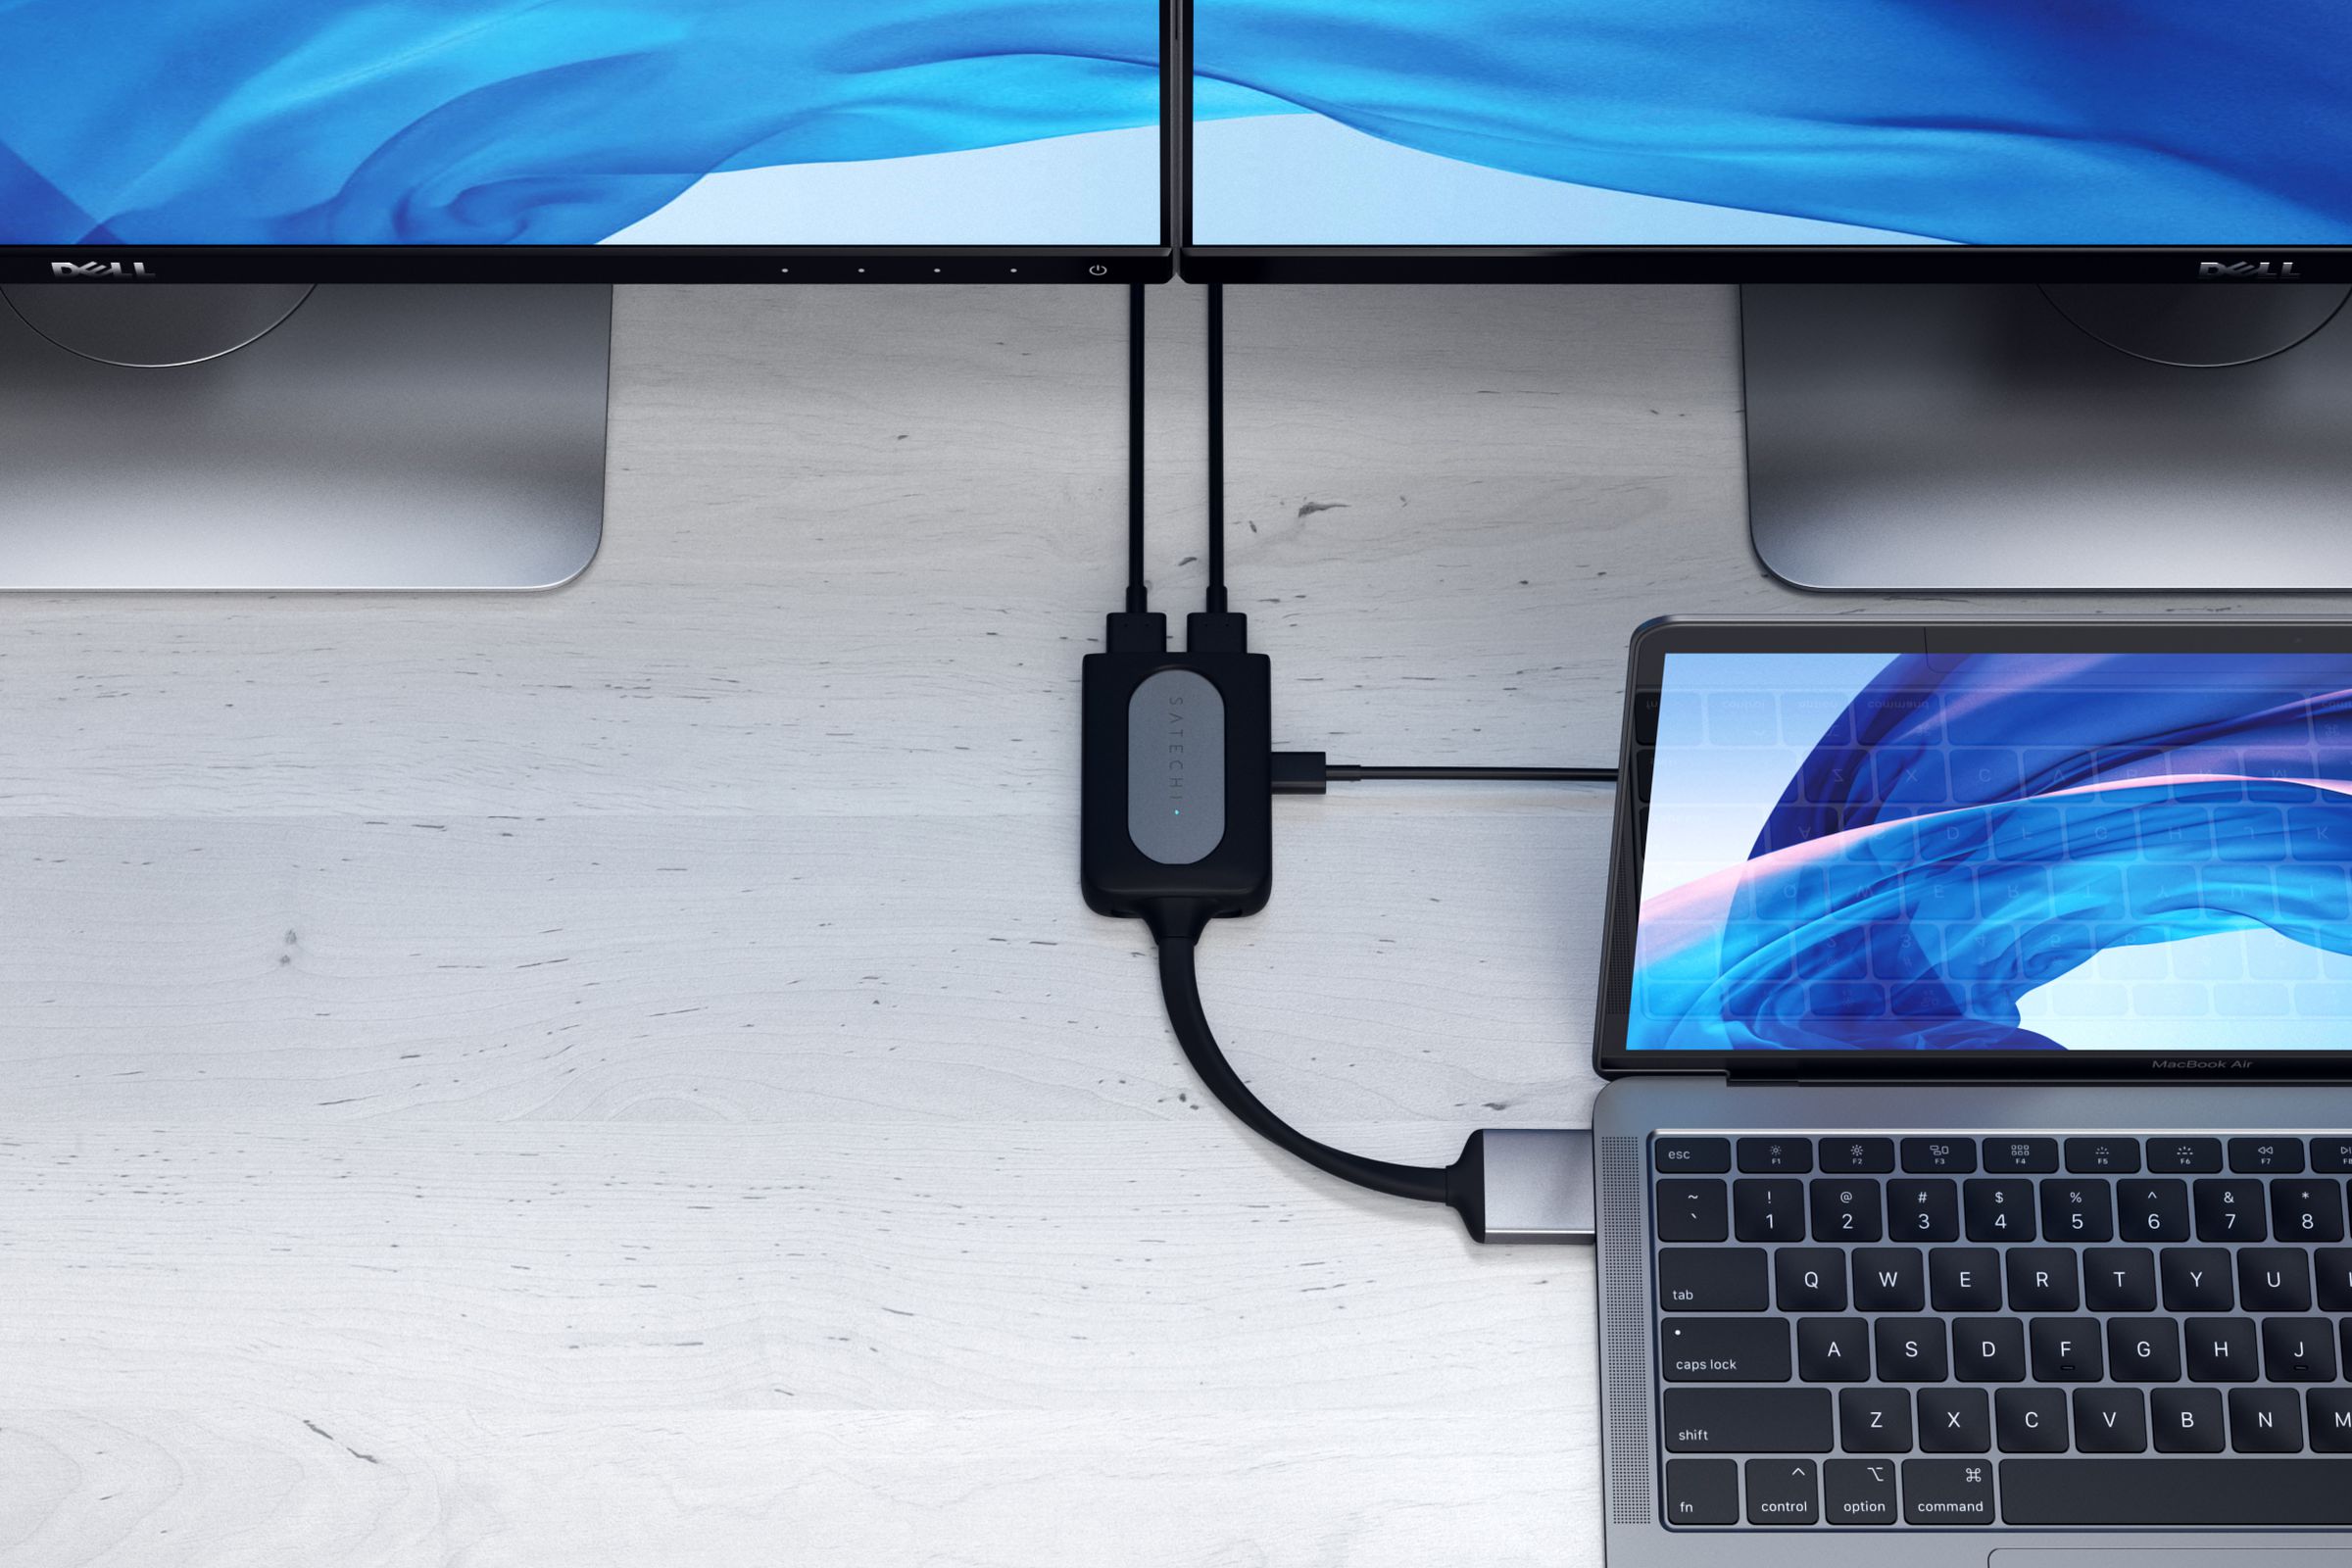 One of Satechi’s USB-C hubs can provide 4K 60Hz signal to two monitors.